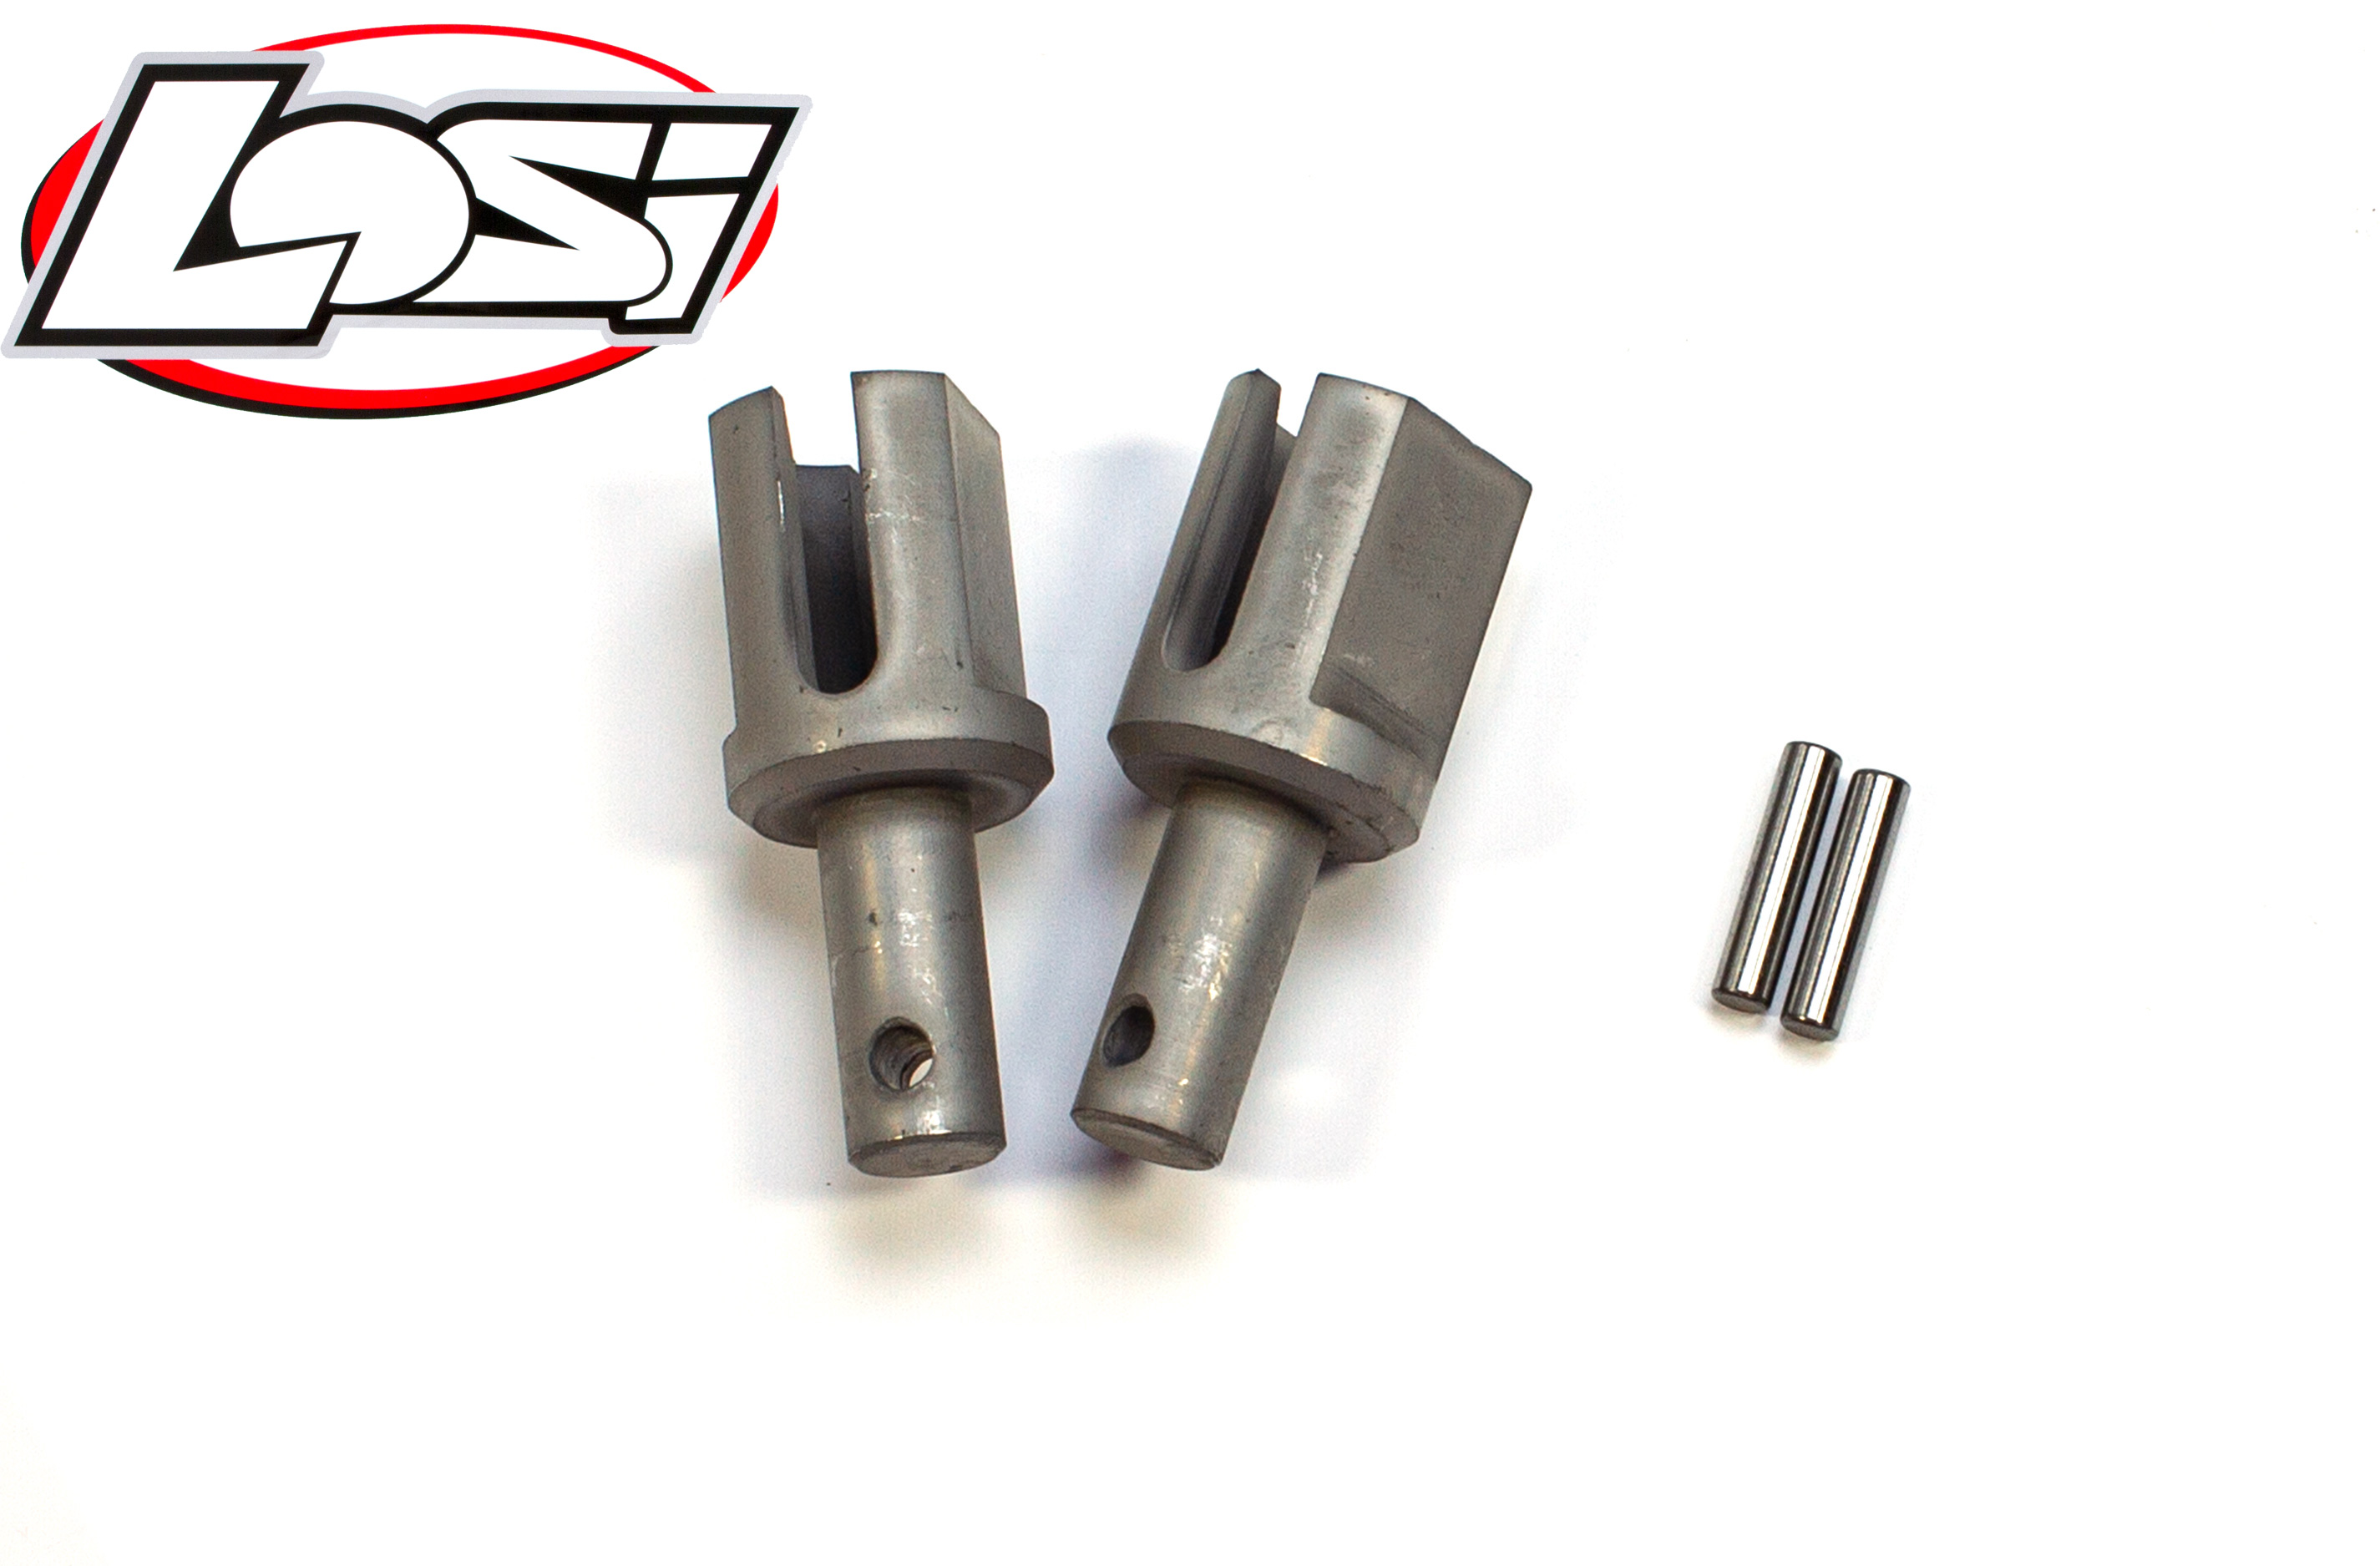 y1583 Losi 5ive-T/B and Losi MINI 300m steel HD center differential drive cups